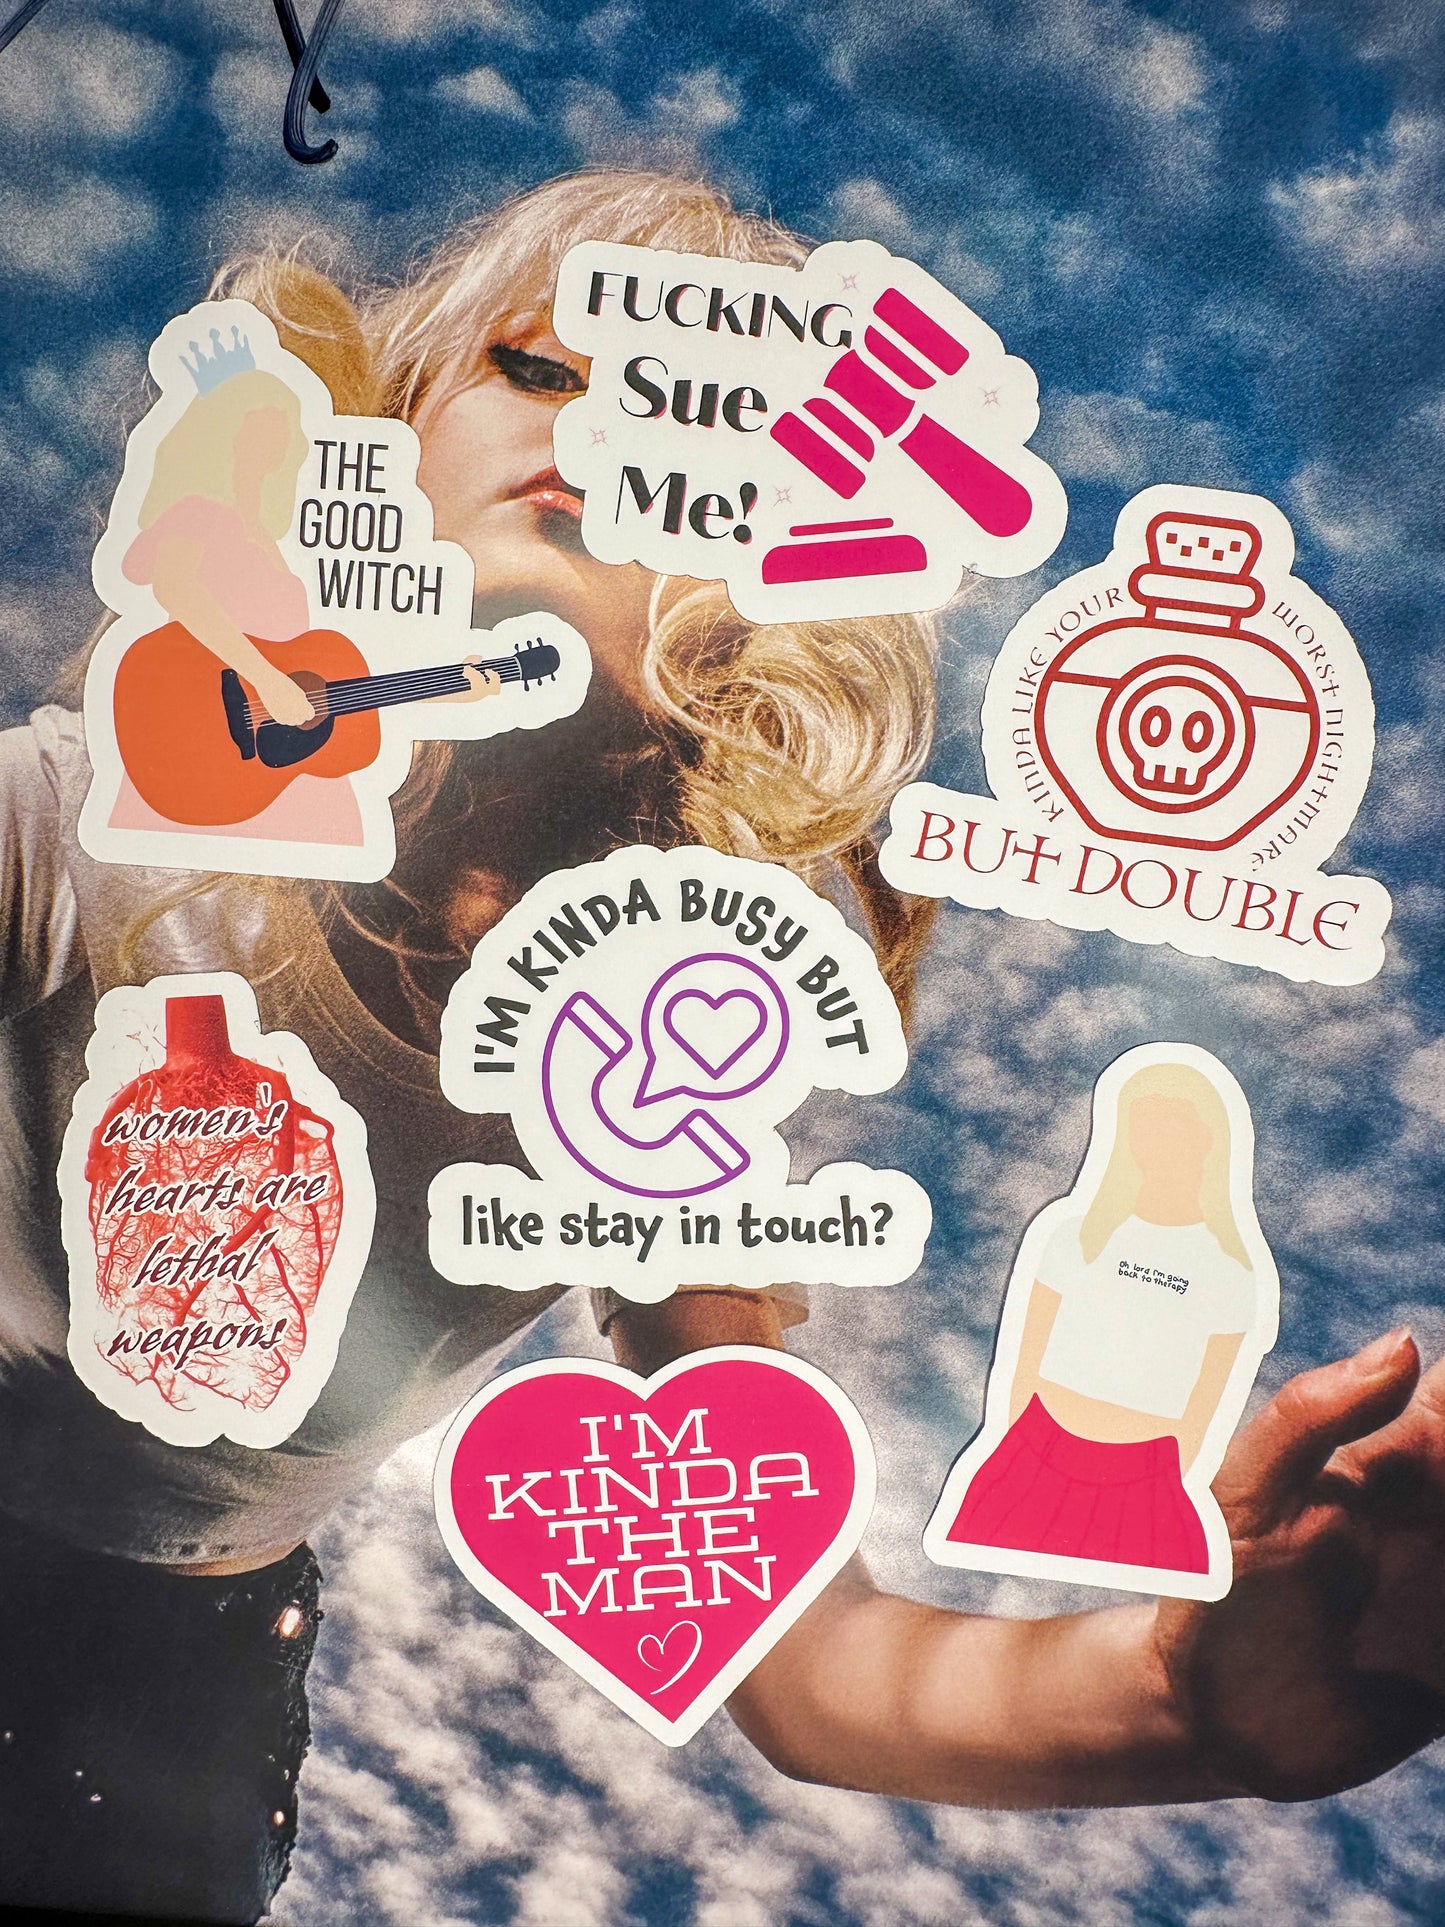 20 Maisie Peters Stickers | The Good Witch You Signed Up For This